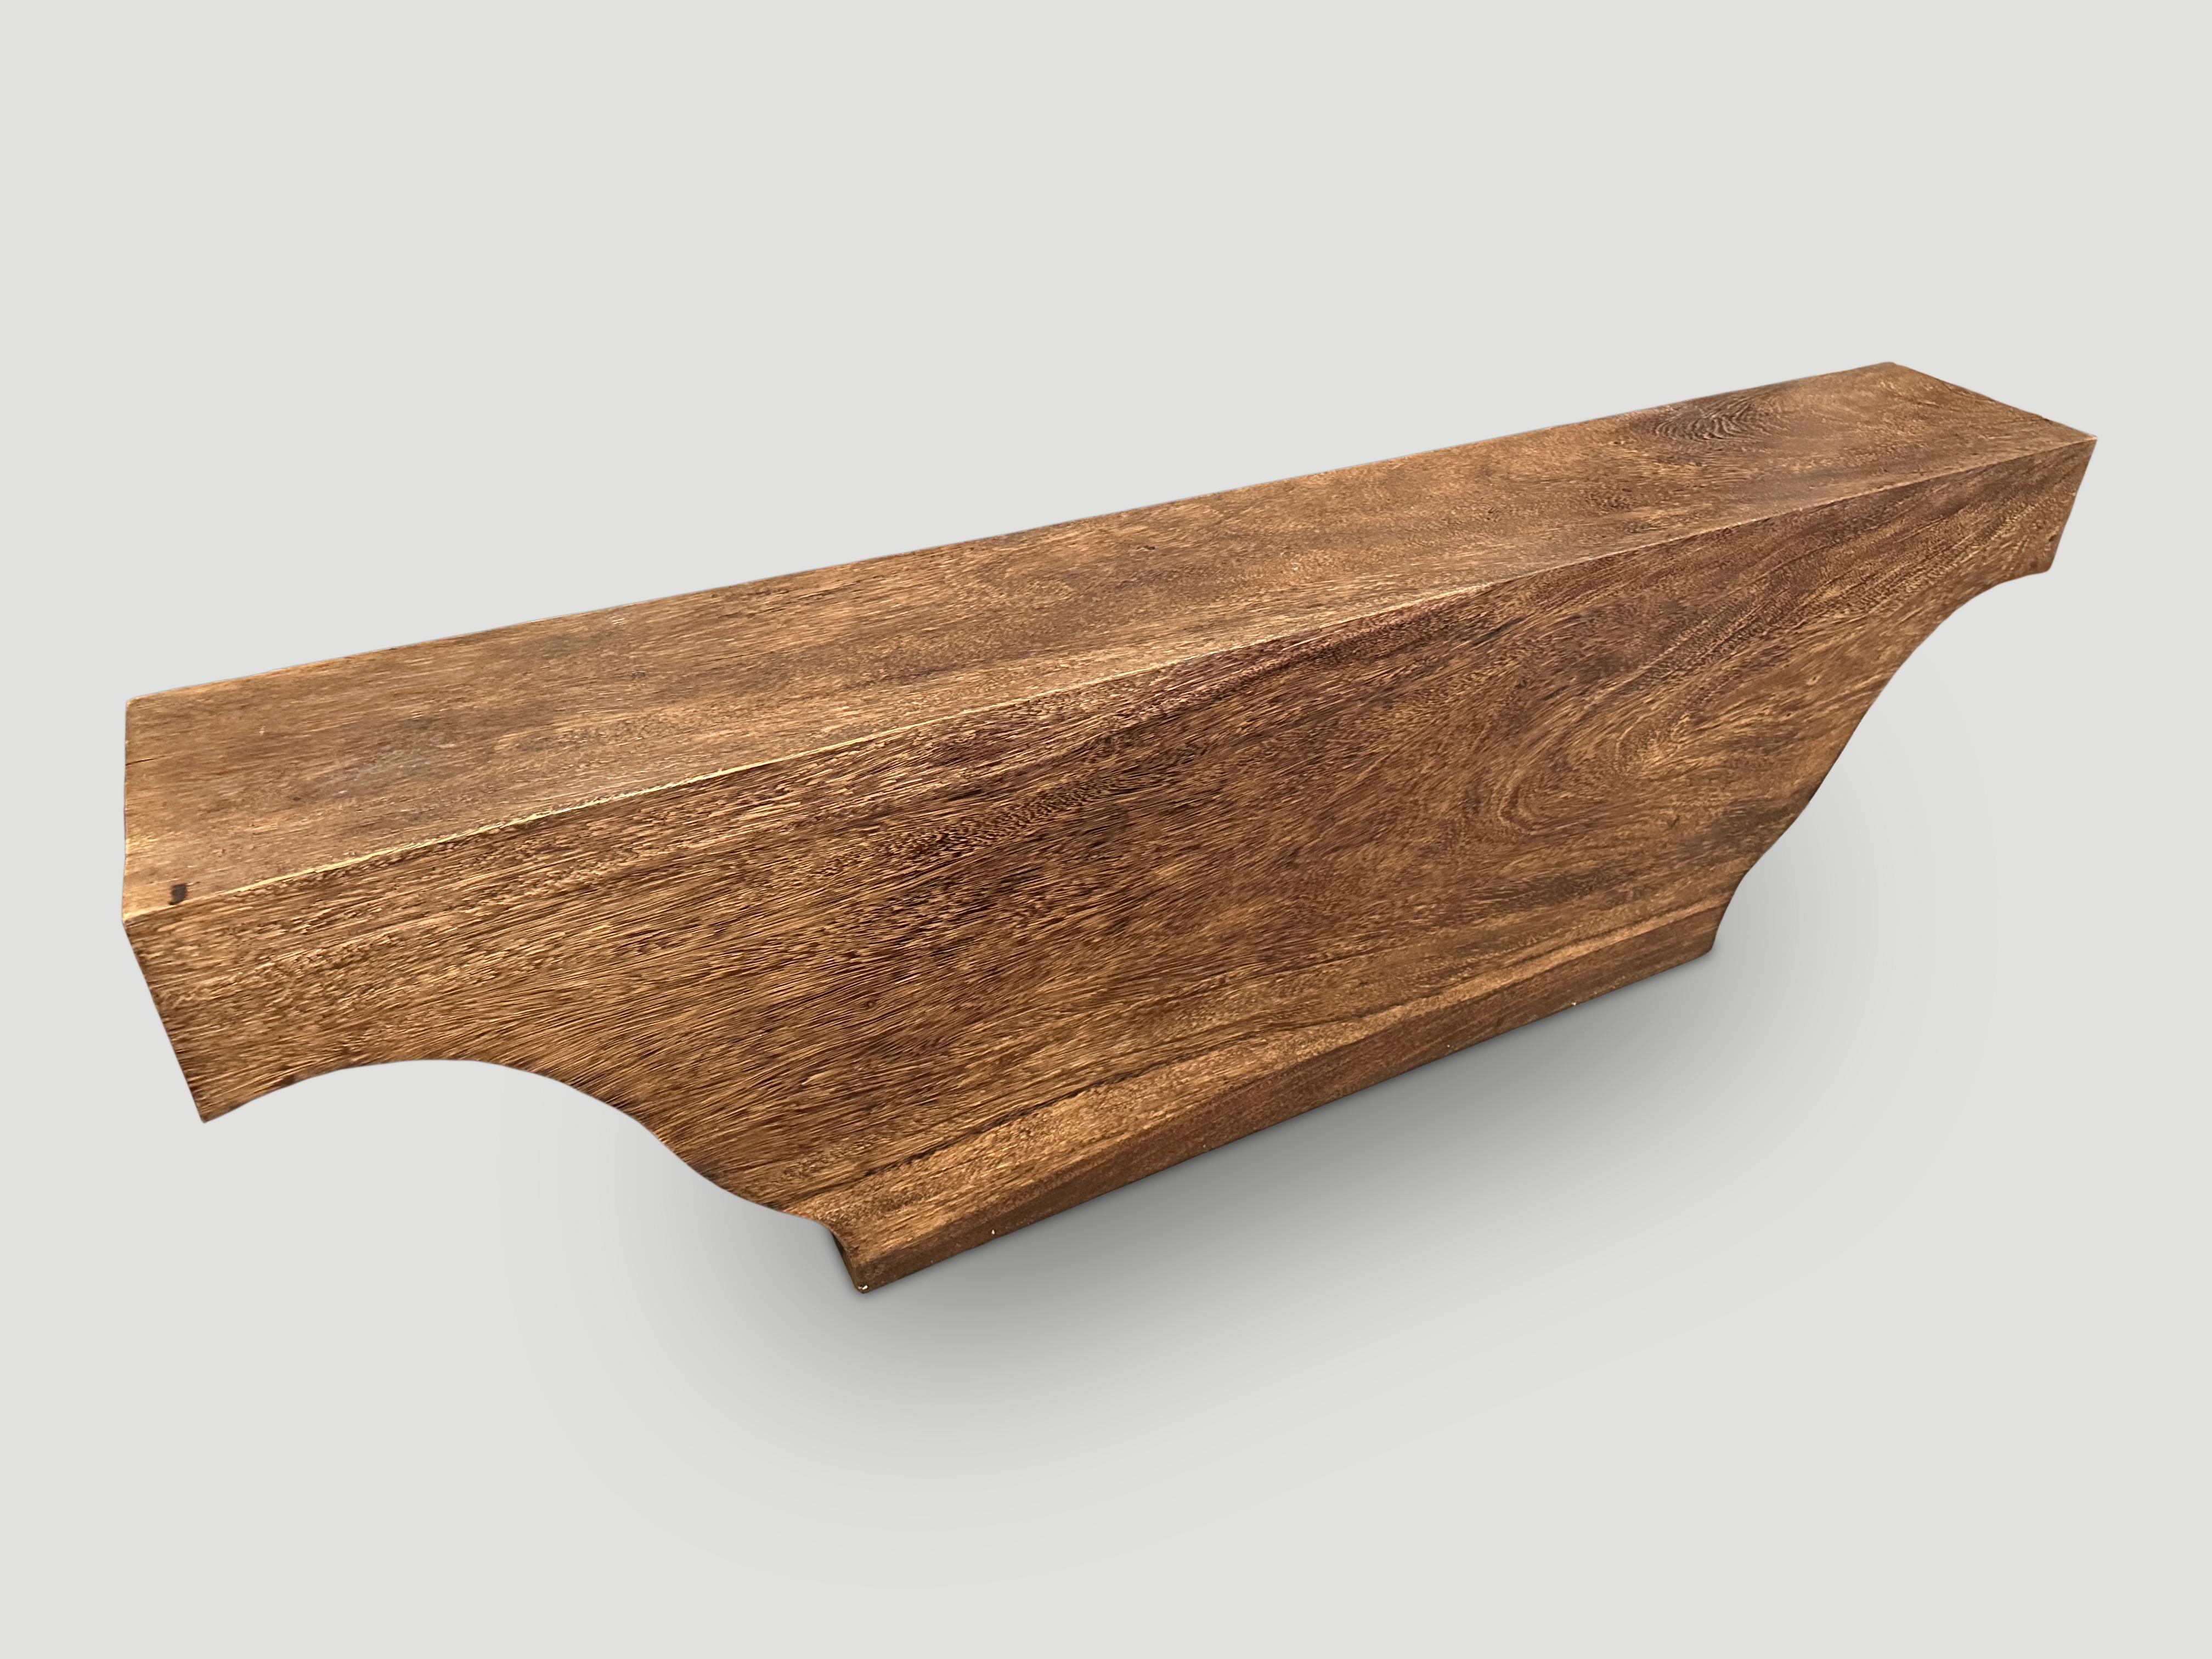 Impressive bench or console made from a single piece of reclaimed Suar wood. A great shape with the top at 63